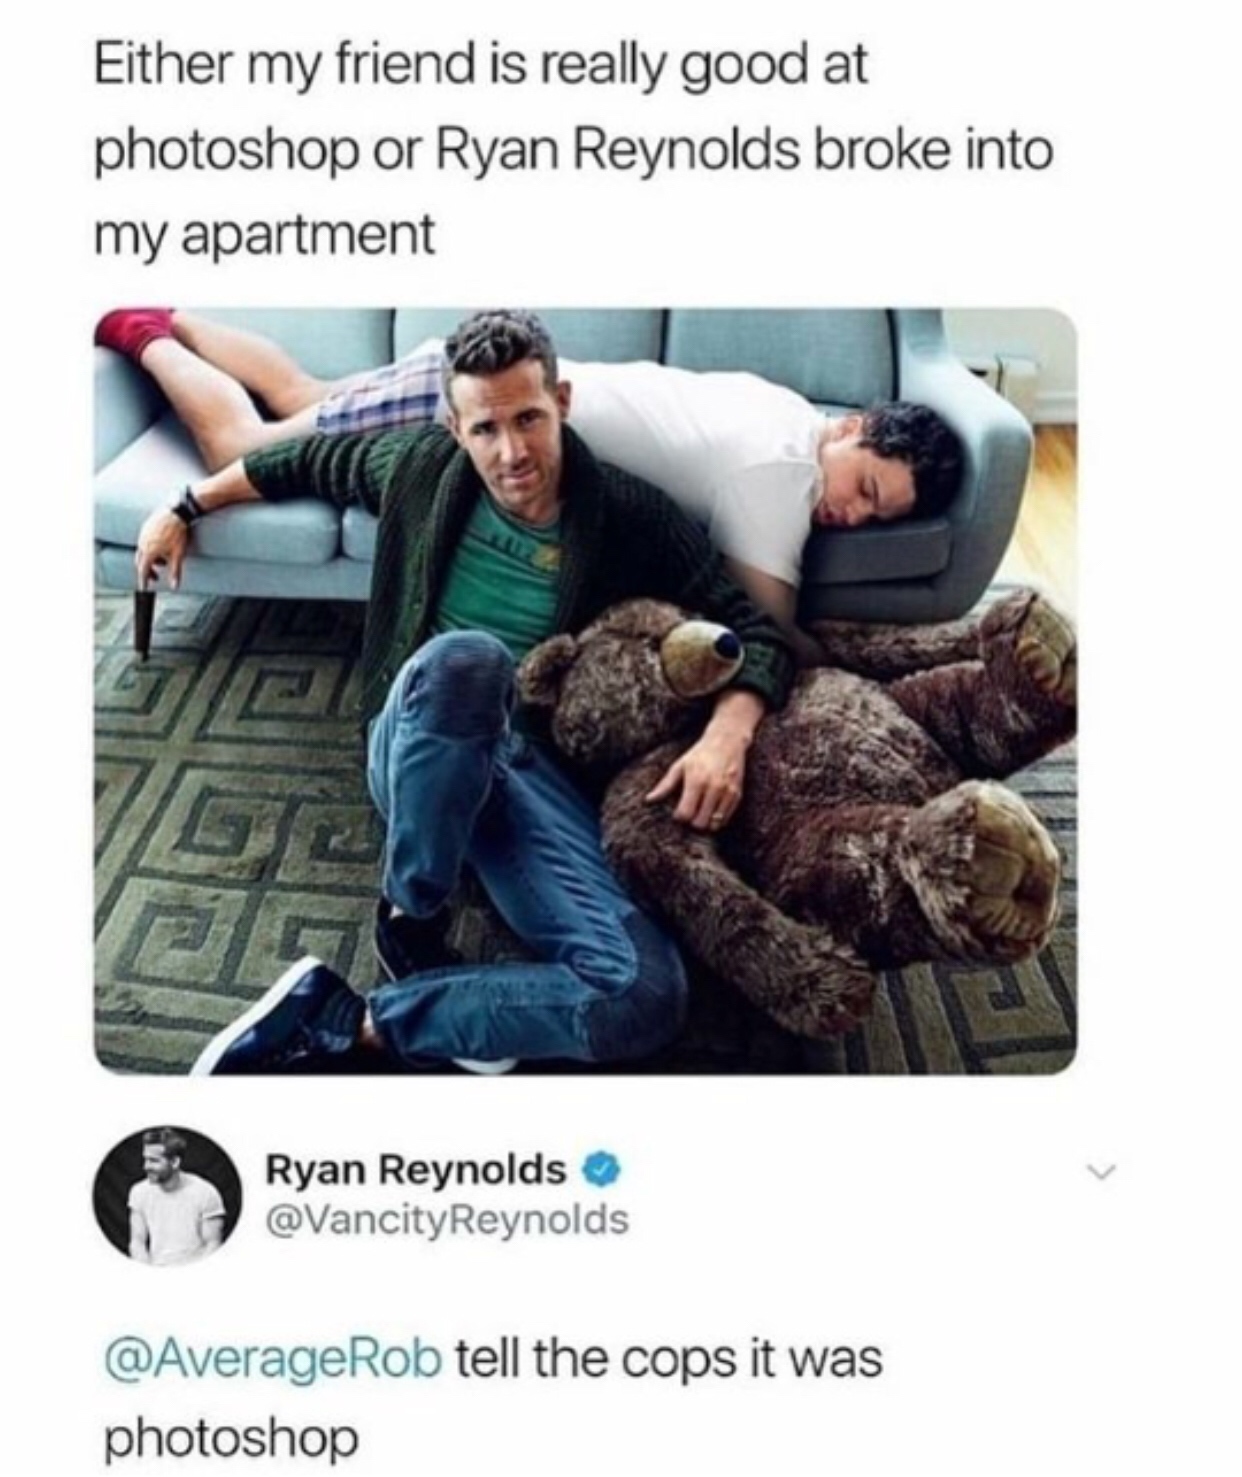 dank meme about either my friend is really good at photoshop or - Either my friend is really good at photoshop or Ryan Reynolds broke into my apartment Ryan Reynolds Reynolds tell the cops it was photoshop